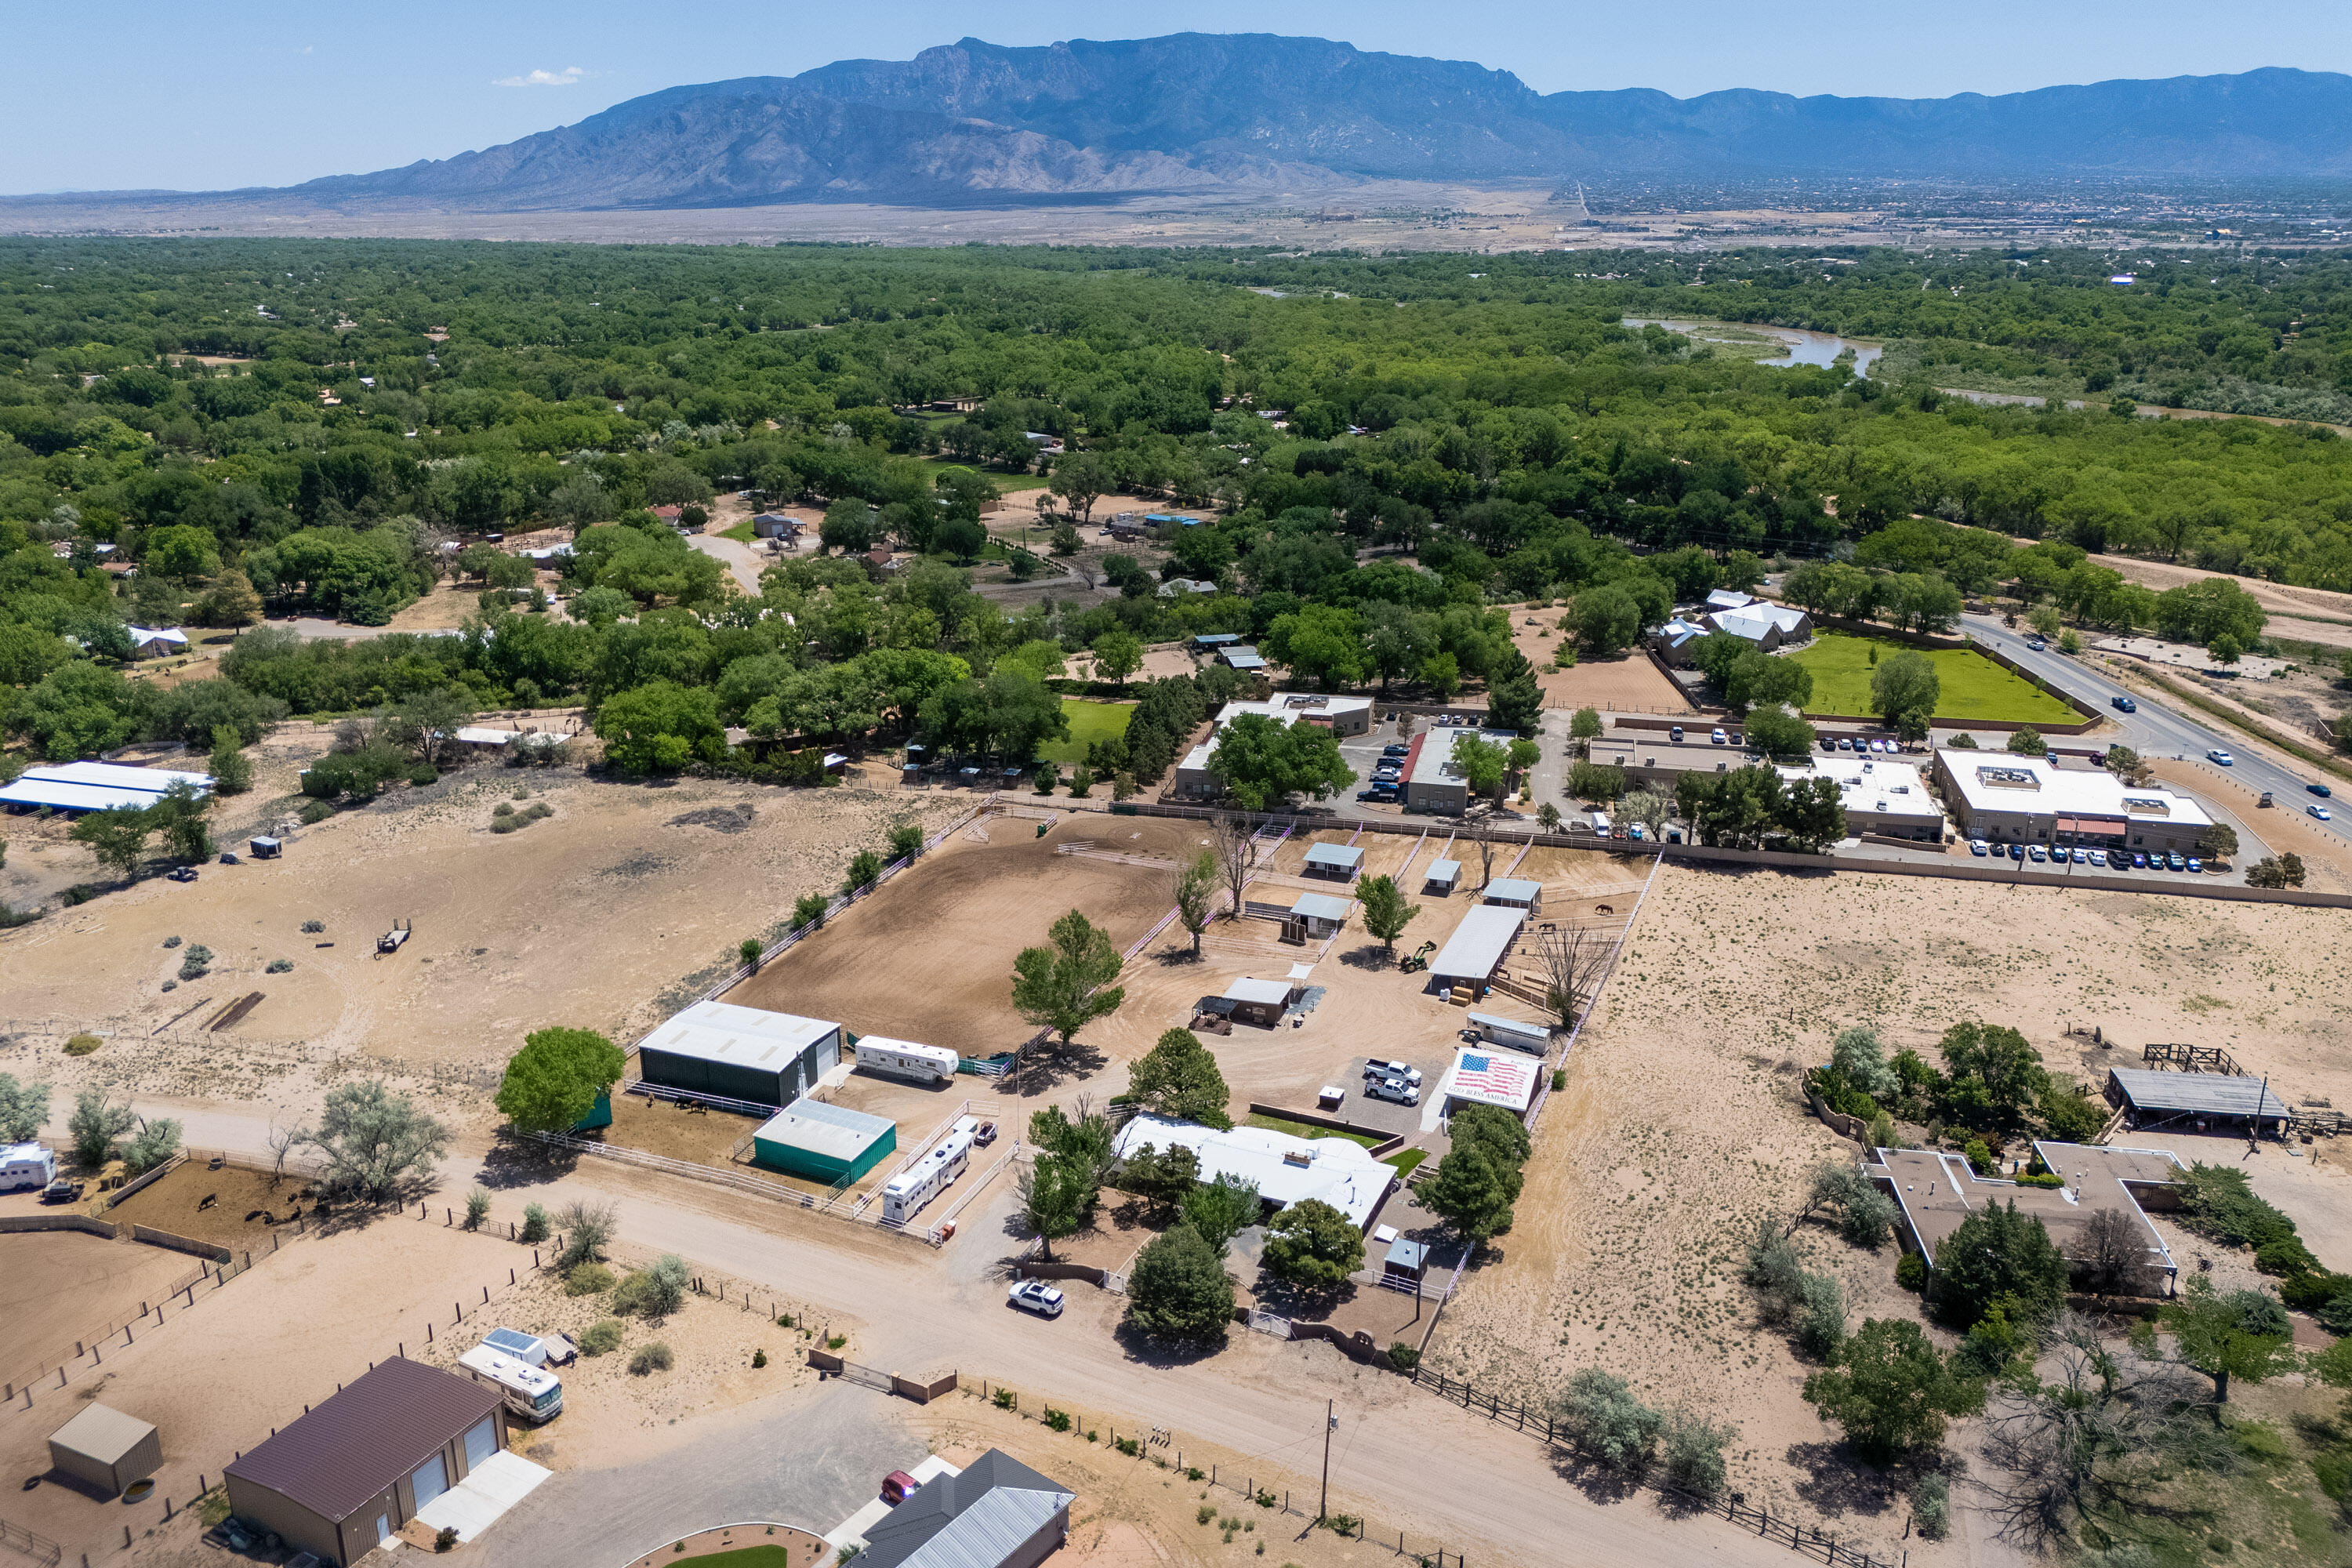 ***Premier Corrales Horse Property*** This fully pipe fenced & gated 3.2 acre ranch features 2122 sq ft home, 41 X 60 heated/cooled metal workshop/office/RV garage, 12 horse stalls/runs w/water & electric, 2 tack rooms, roping arena w/sprinkler system, A-Frame outbuilding w/loft, 3-car detached garage/storage, generator house, private well + 3 irrigation wells/windmill. Main house features remodeled primary suite w/rainfall shower (plumbed for steamer), radiant heat floor, beam ceilings, remodeled guest bath, wood burning fireplace w/indoor grill. Large, covered patio overlooking the horse facilities & Sandia Mountains. Prime location on the south end of Corrales with direct access to riding trails leading out to the Rio Grande, Corrales Bosque Preserve and yet minutes to city amenities.